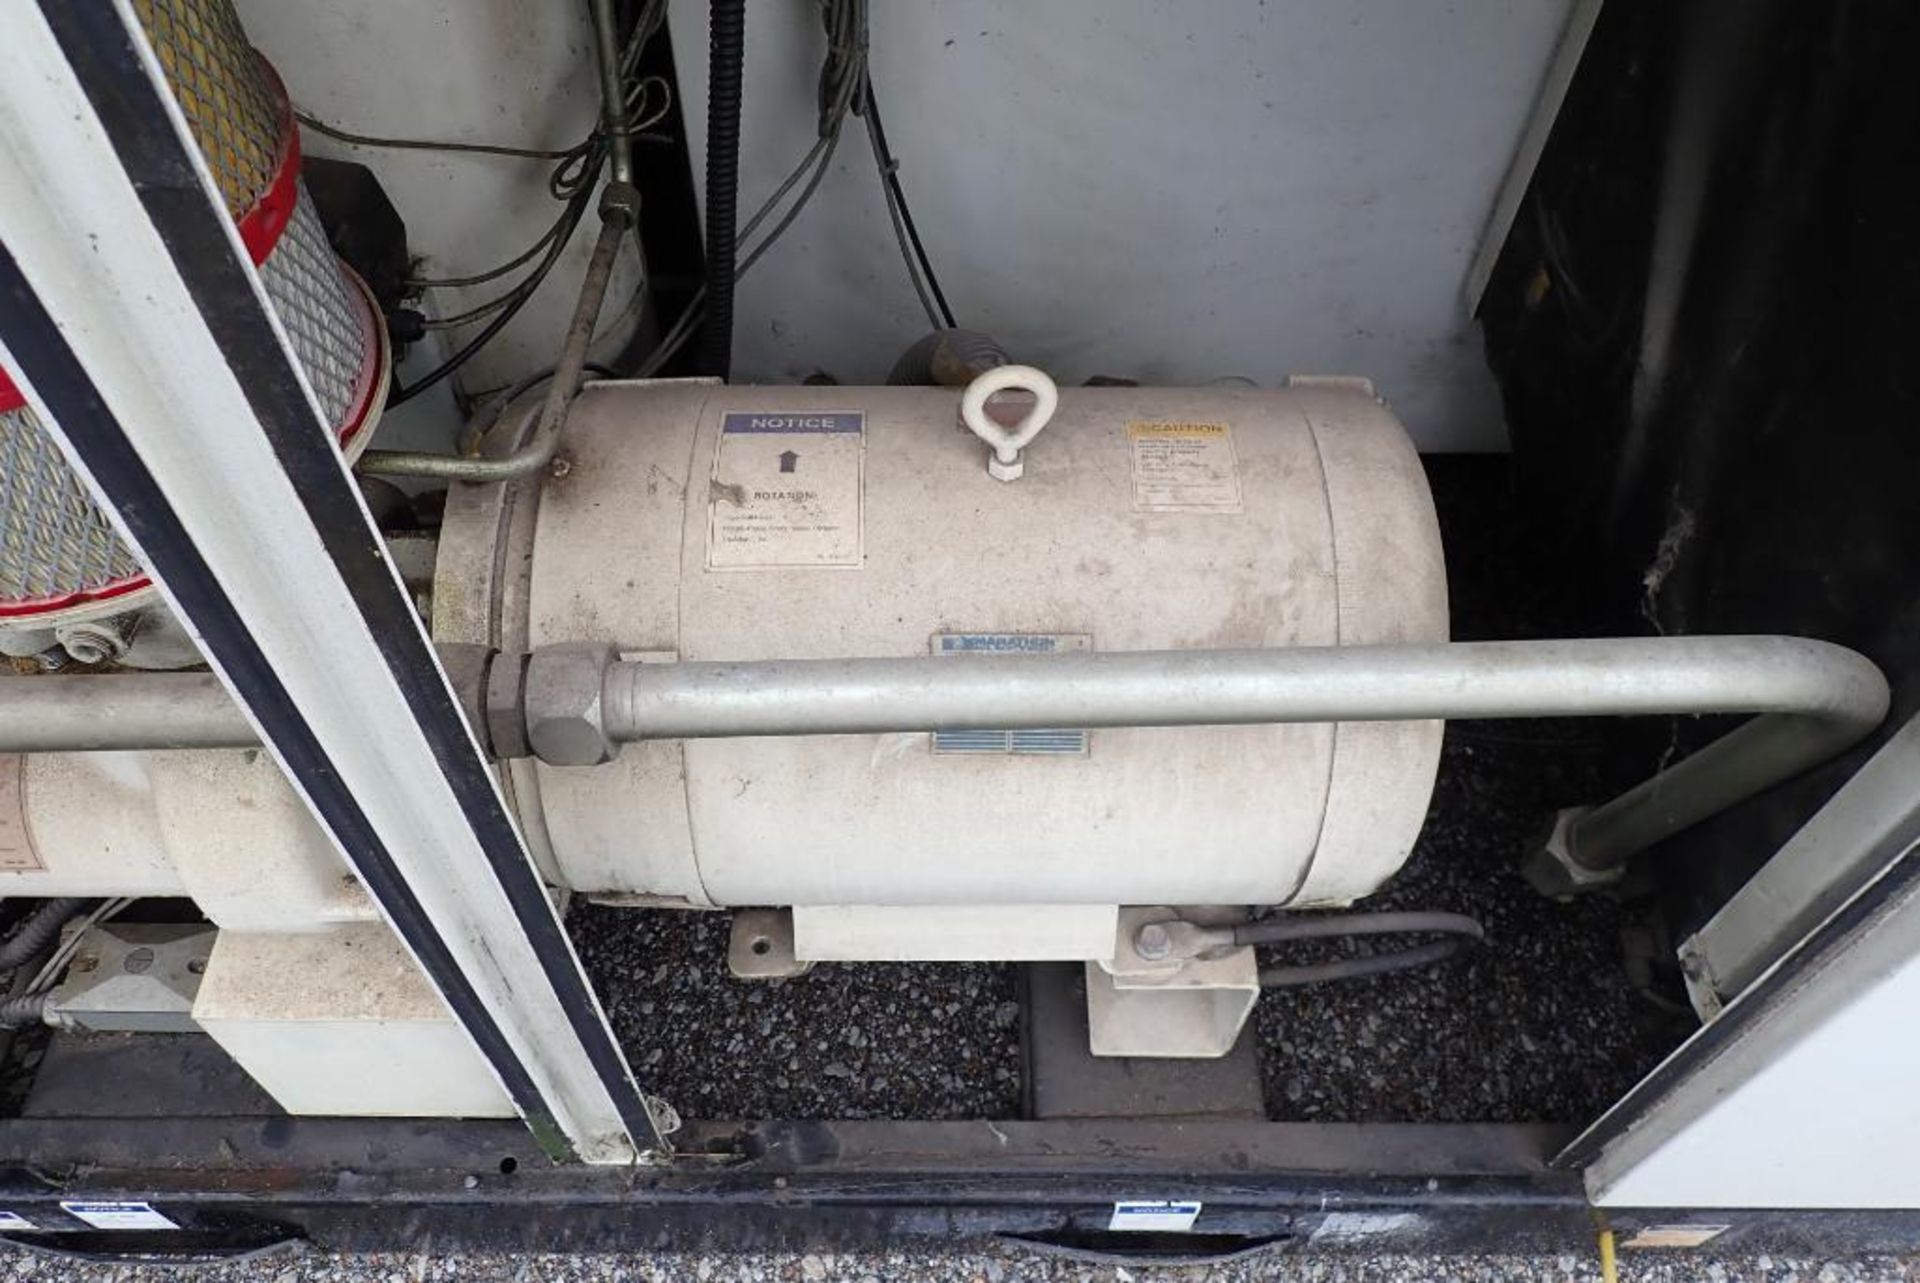 1991 Ingersoll Rand 60 hp air compressor - Image 7 of 25